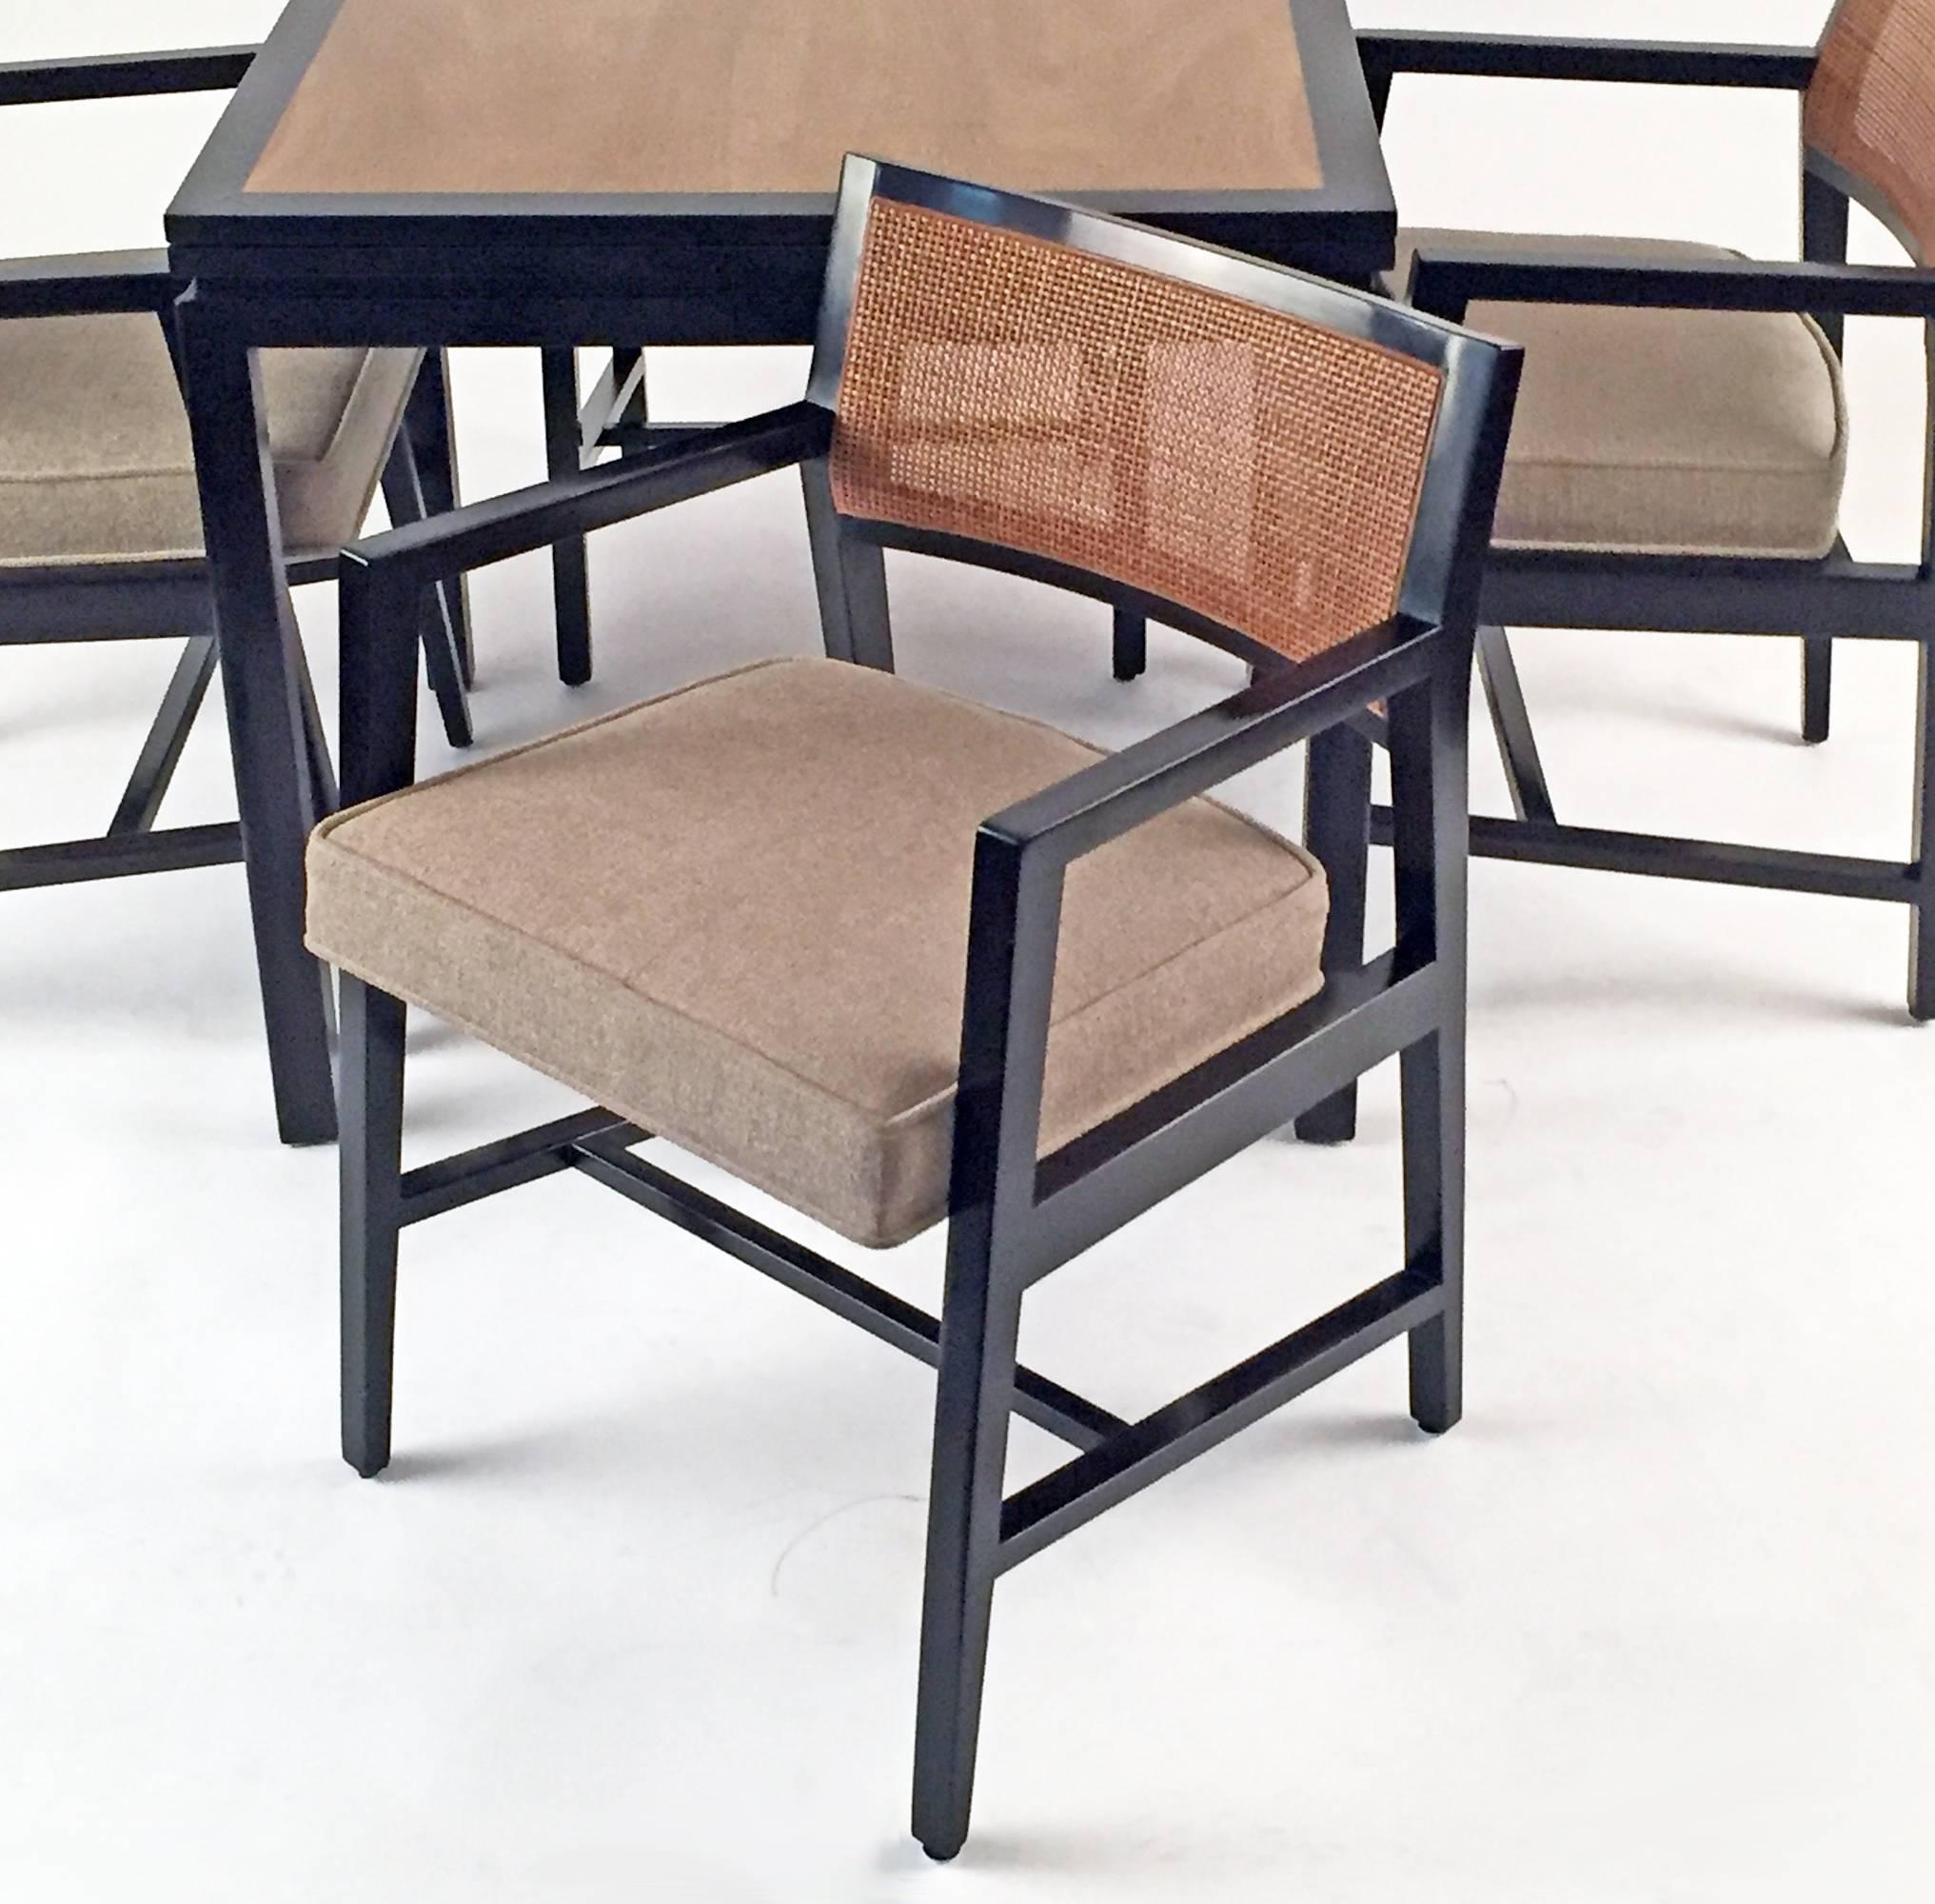 Flip-top table and four chairs designed by Edward Wormley for Dunbar Furniture, Berne, Indiana. Retains the original D gold Dunbar tag and order tag. When flipped open, the table doubles in size. 32